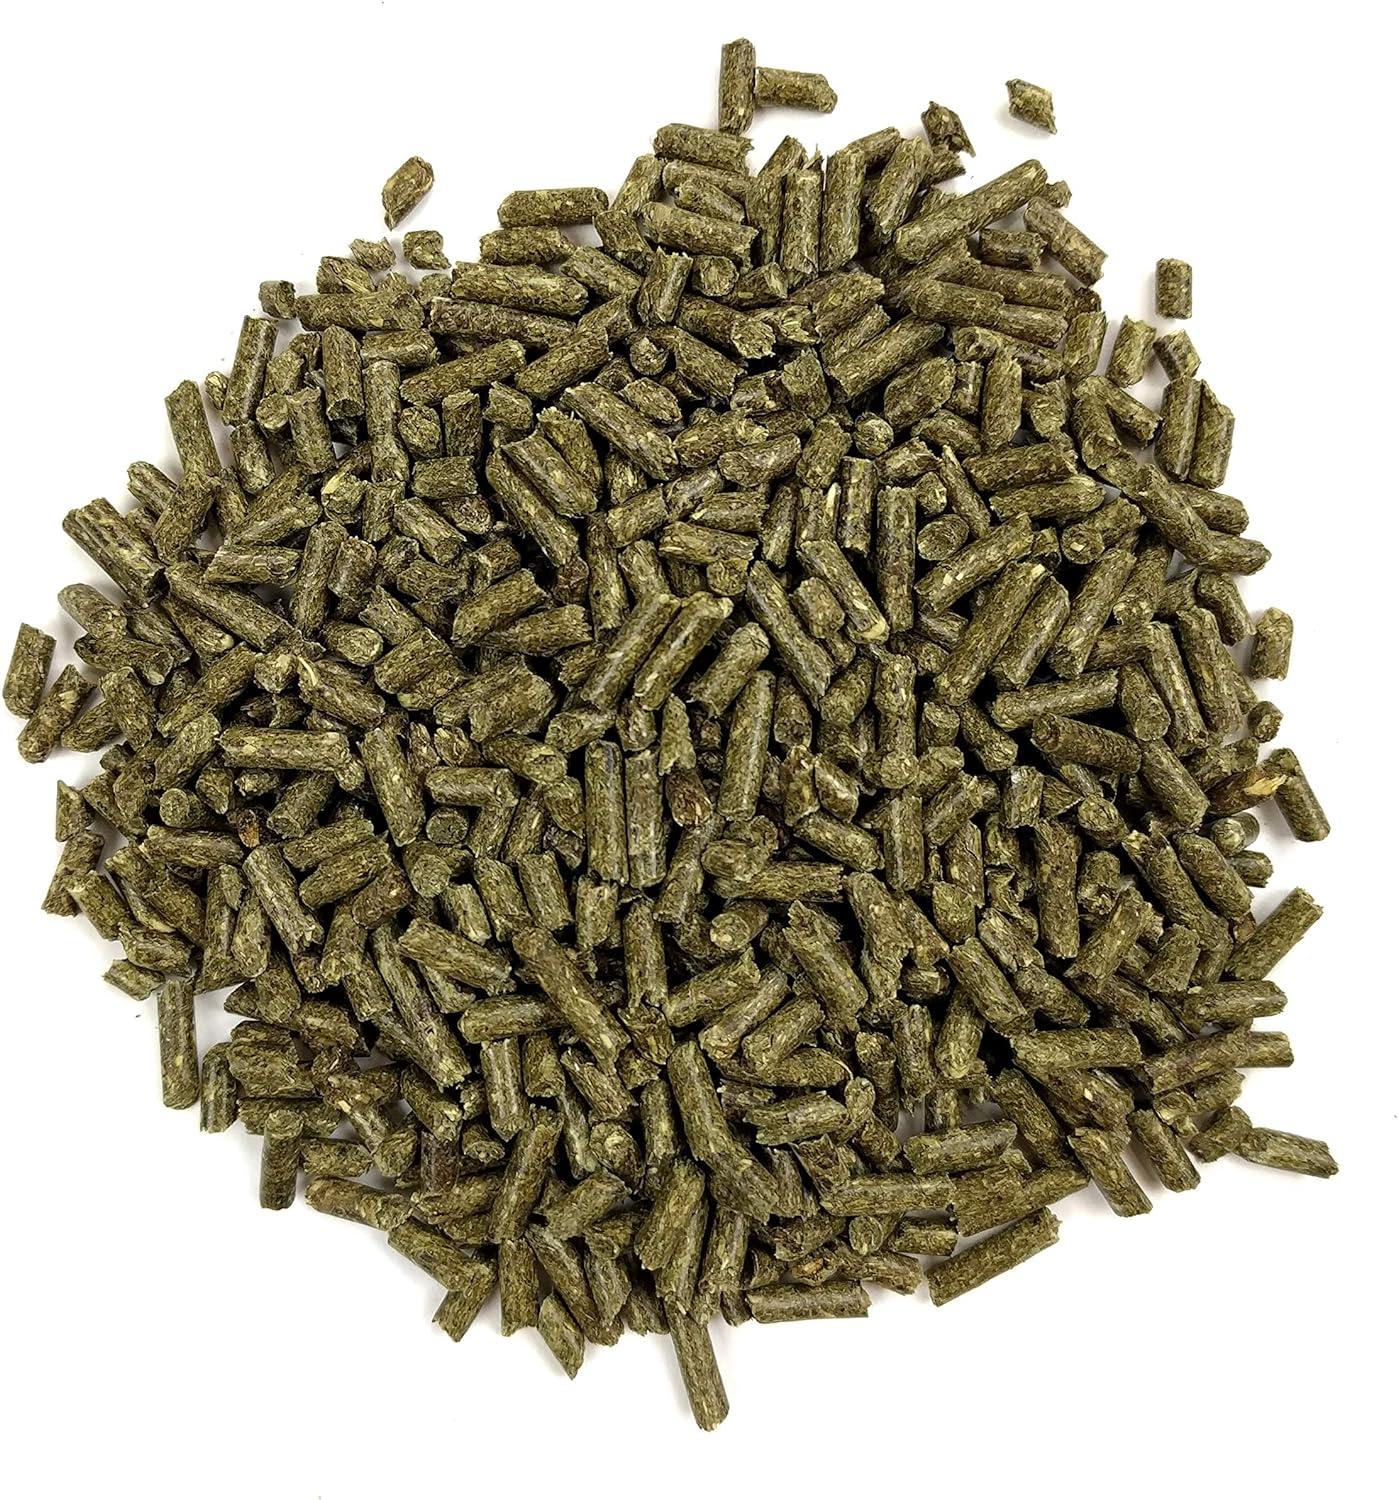 Oxbow Essentials Adult Rabbit Food - All Natural Adult Rabbit Pellets - Veterinarian Recommended- No Artificial Ingredients- All Natural Vitamins & Minerals- Made in the USA- 5 lb.